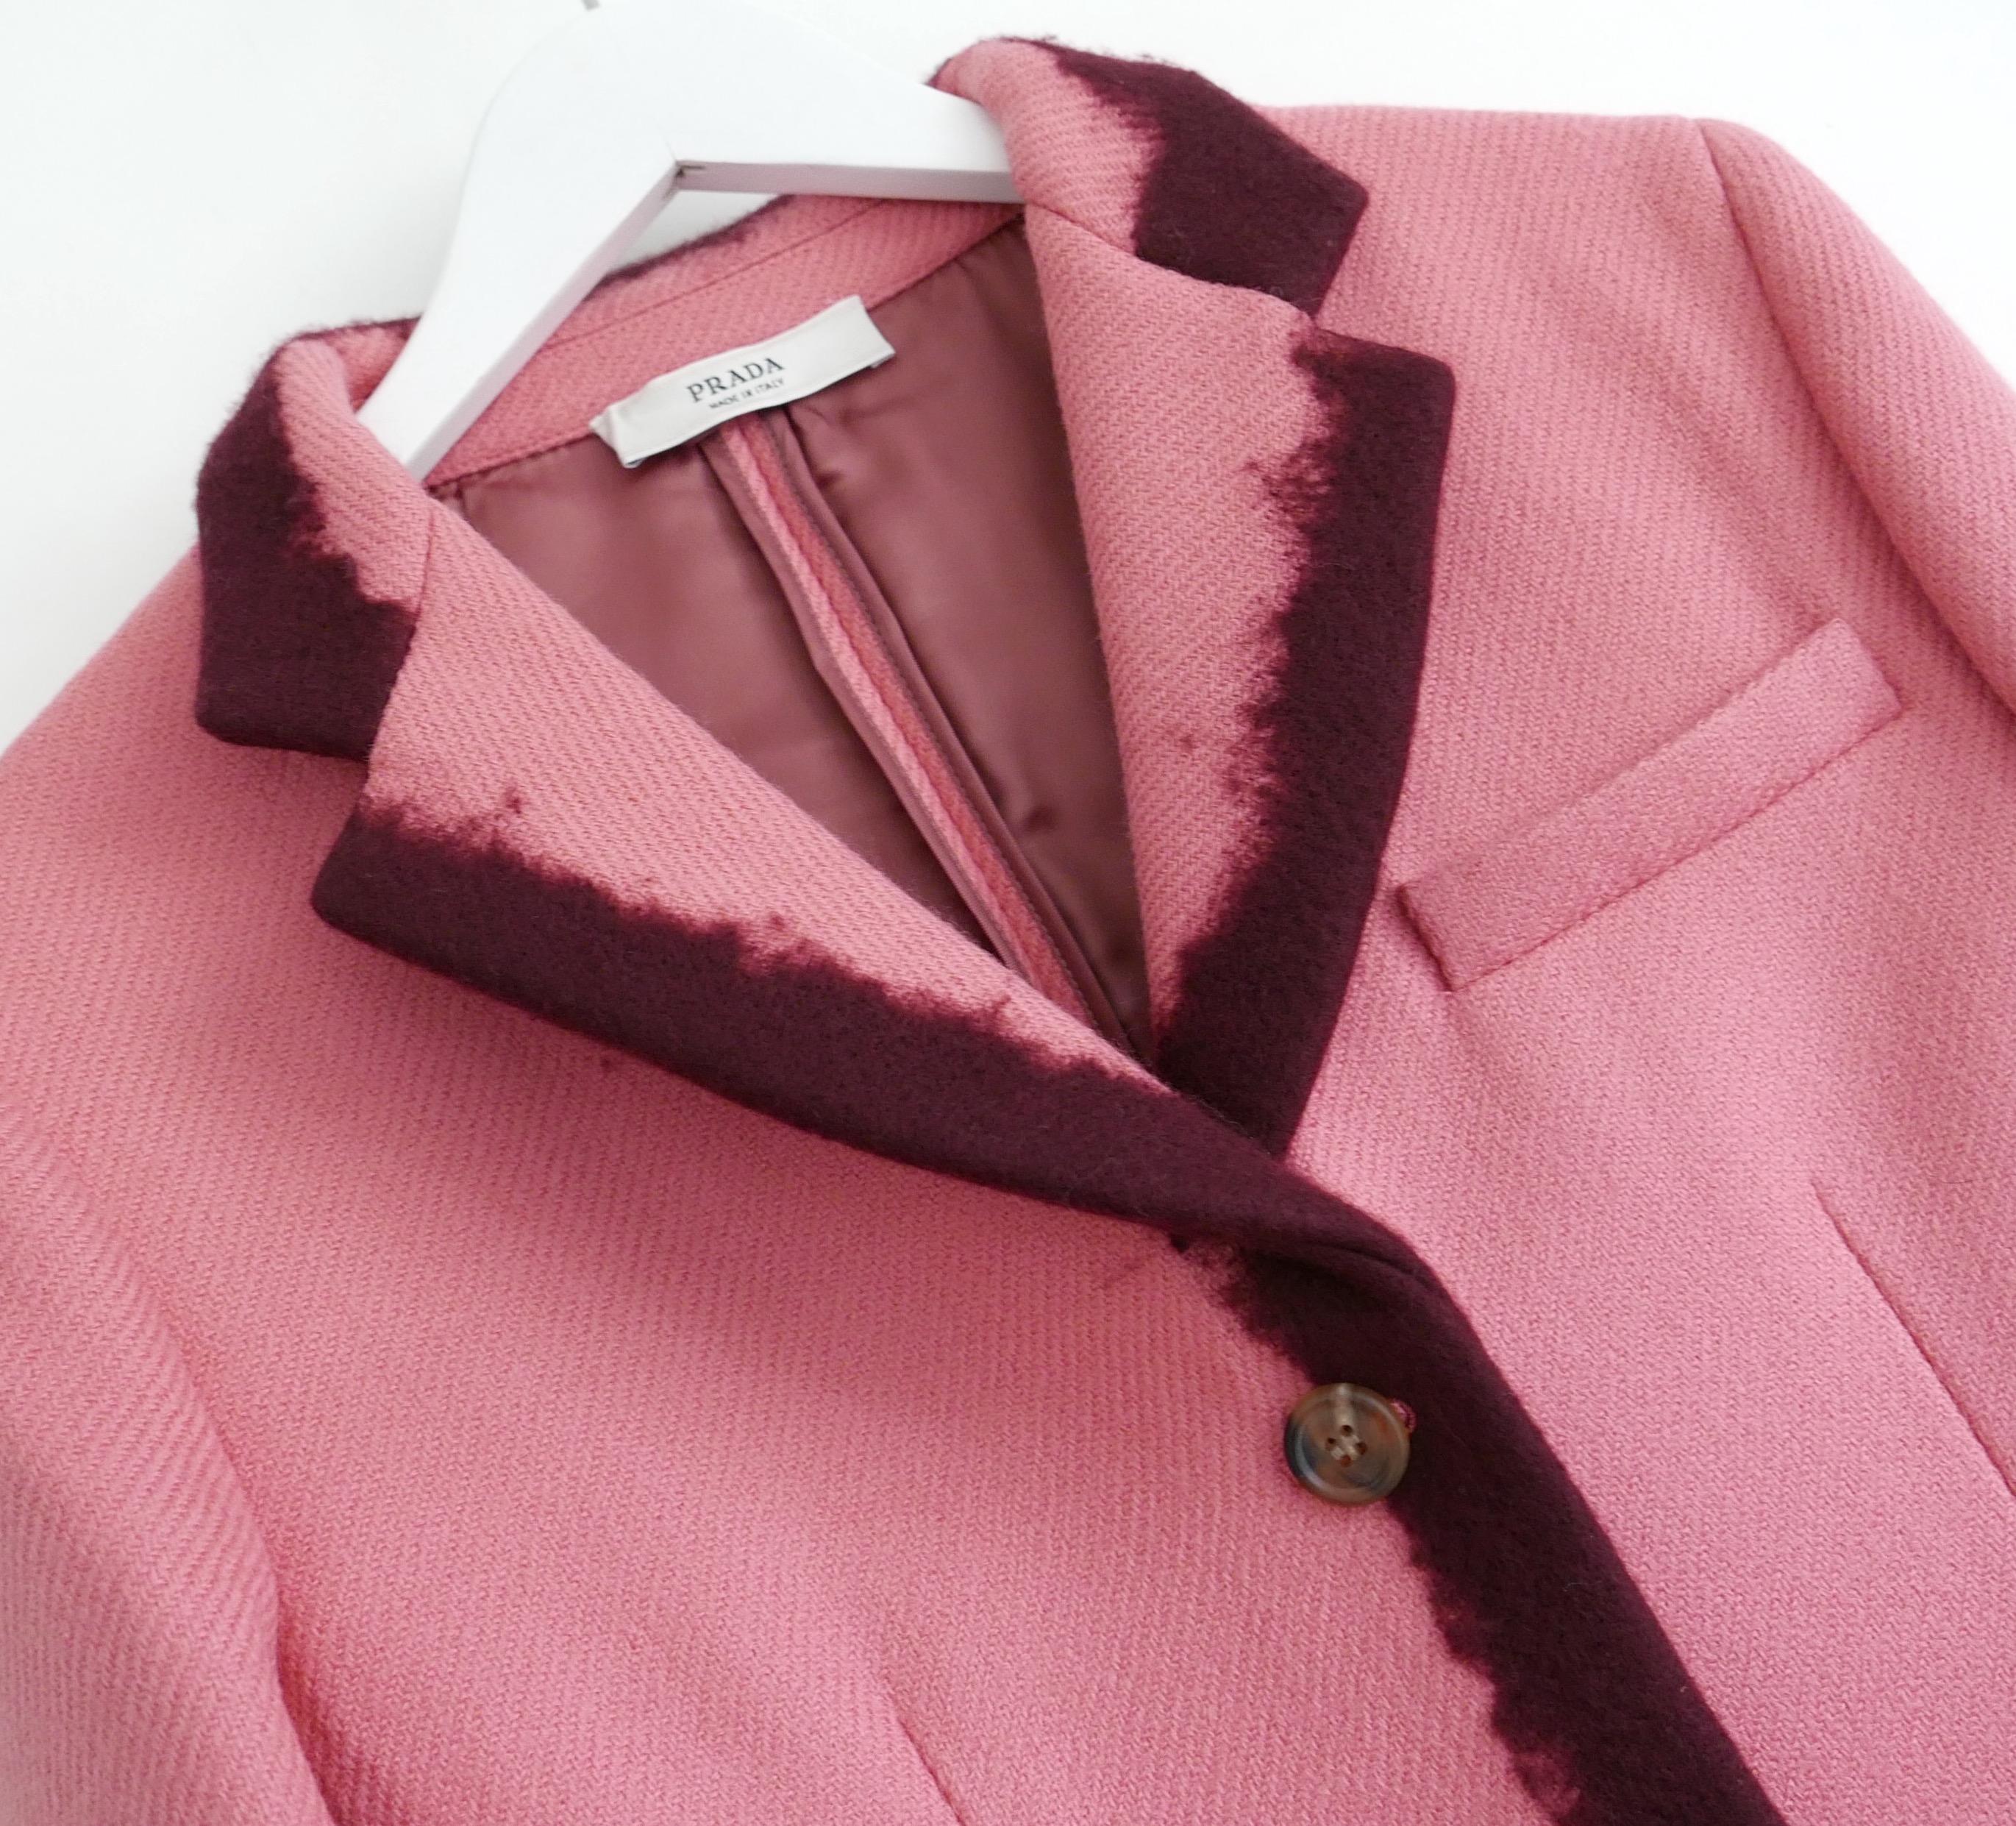 Utterly amazing Prada Fall 2007 jacket in super rare, worn once condition. Made from bubblegum pink wool twill with burgundy hand applied felted ombre edgings. Superbly tailored with pannier padded shaped hips, flap pockets, slit cuffs with poppers,